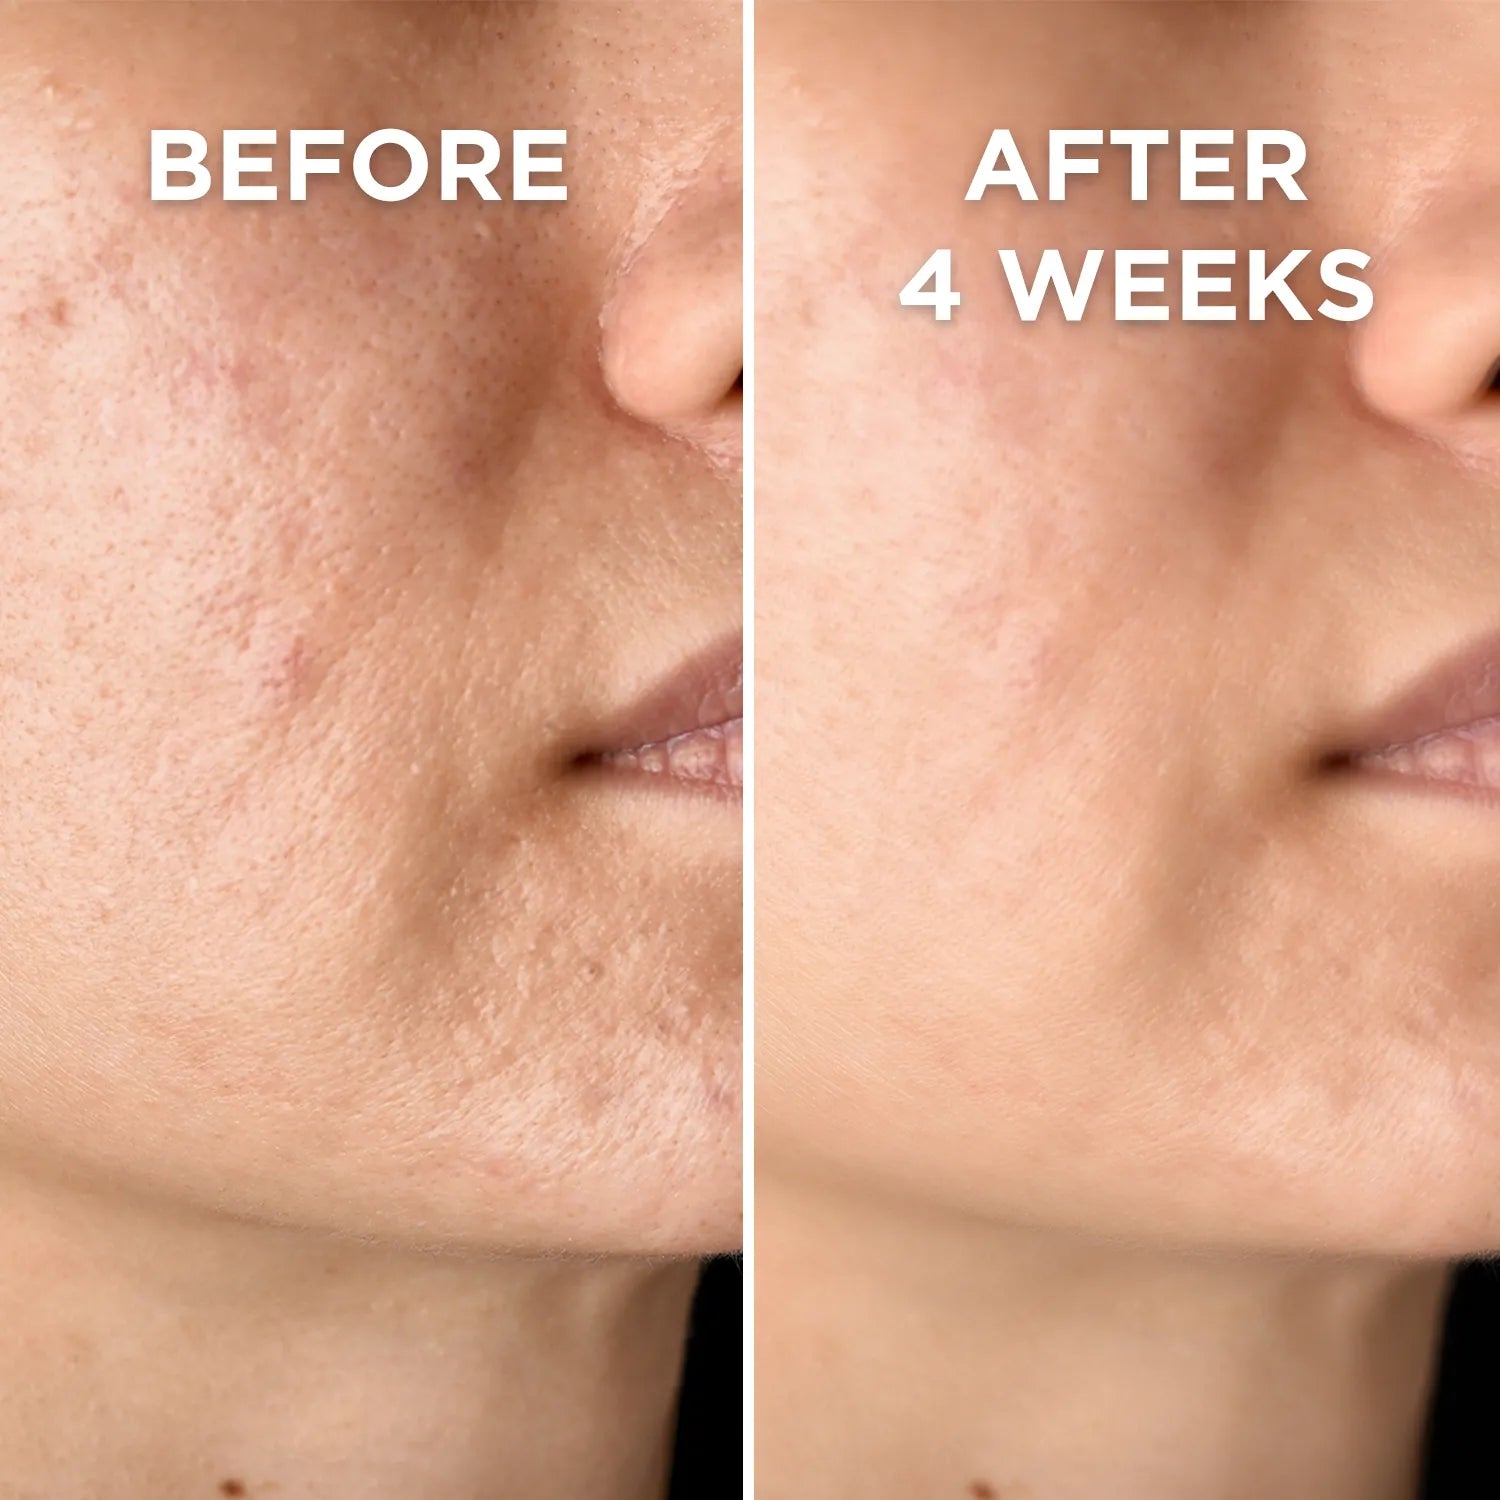 Before and after results of using Prism best face creams for glowing skin